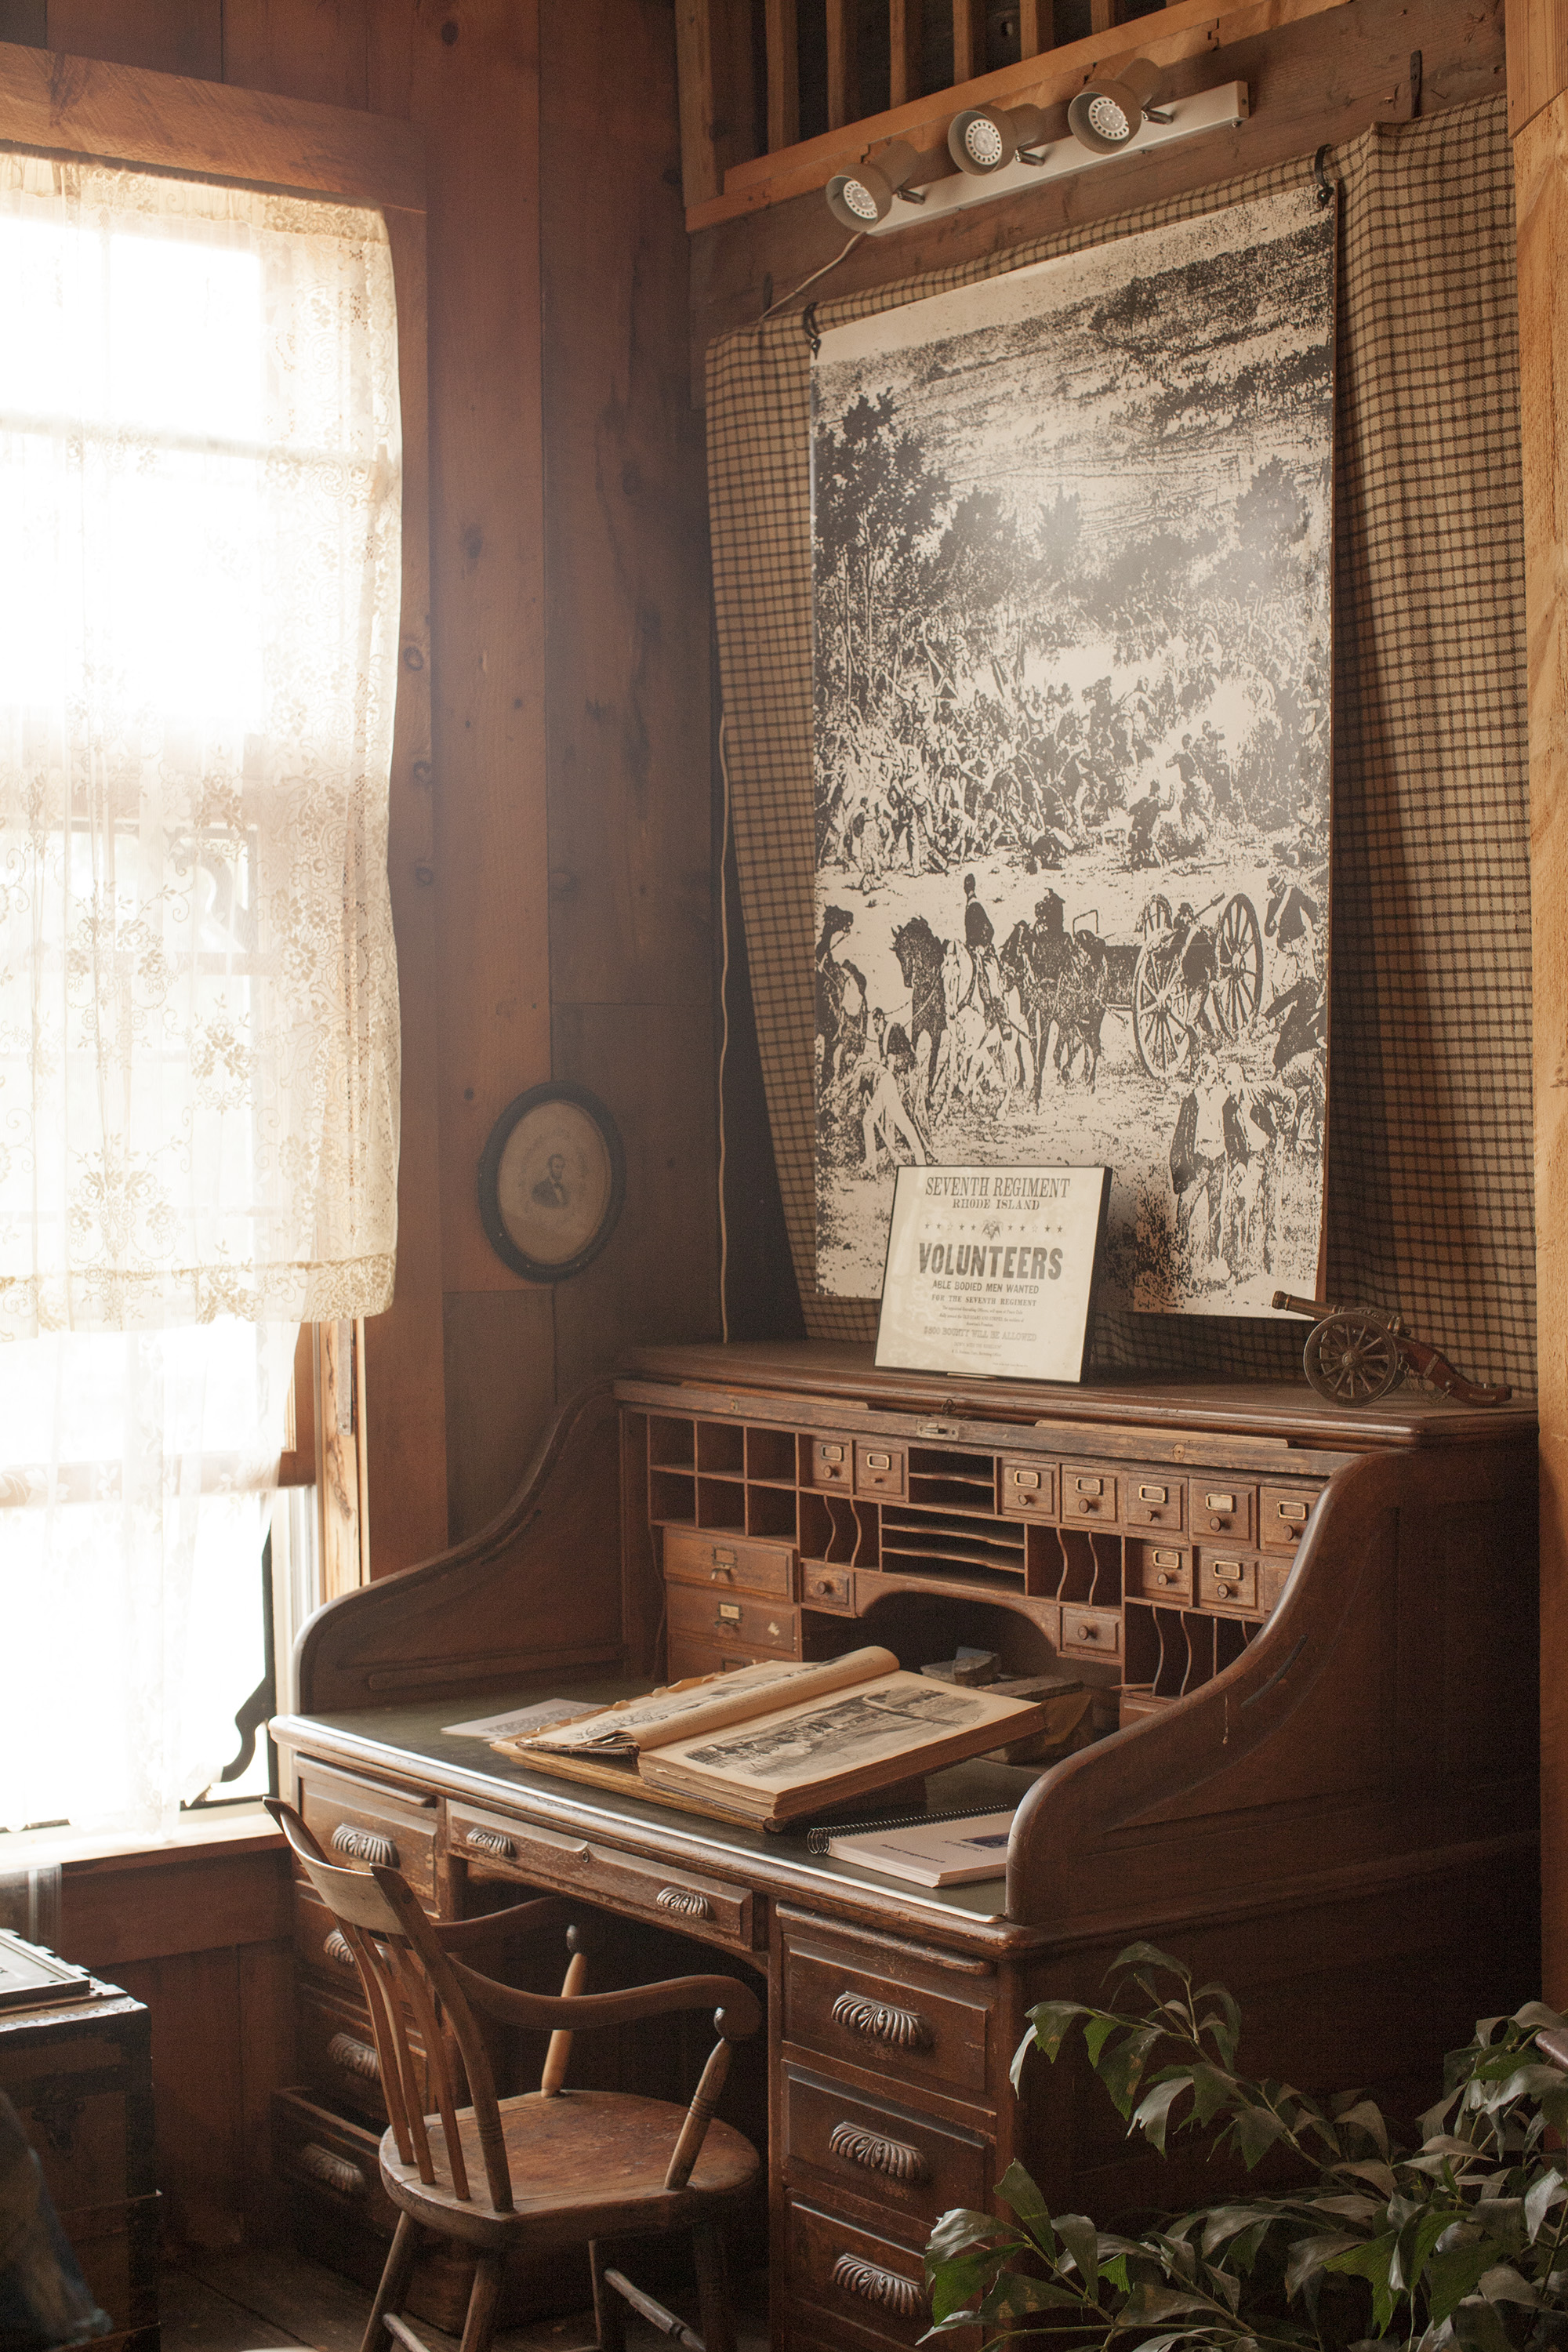 A vintage railway desk in the Metz Exhibit Hall at the South County Museum. The hall houses the museum's permanent collection including the Victorian Kitchen, the General Store and Native American exhibits.